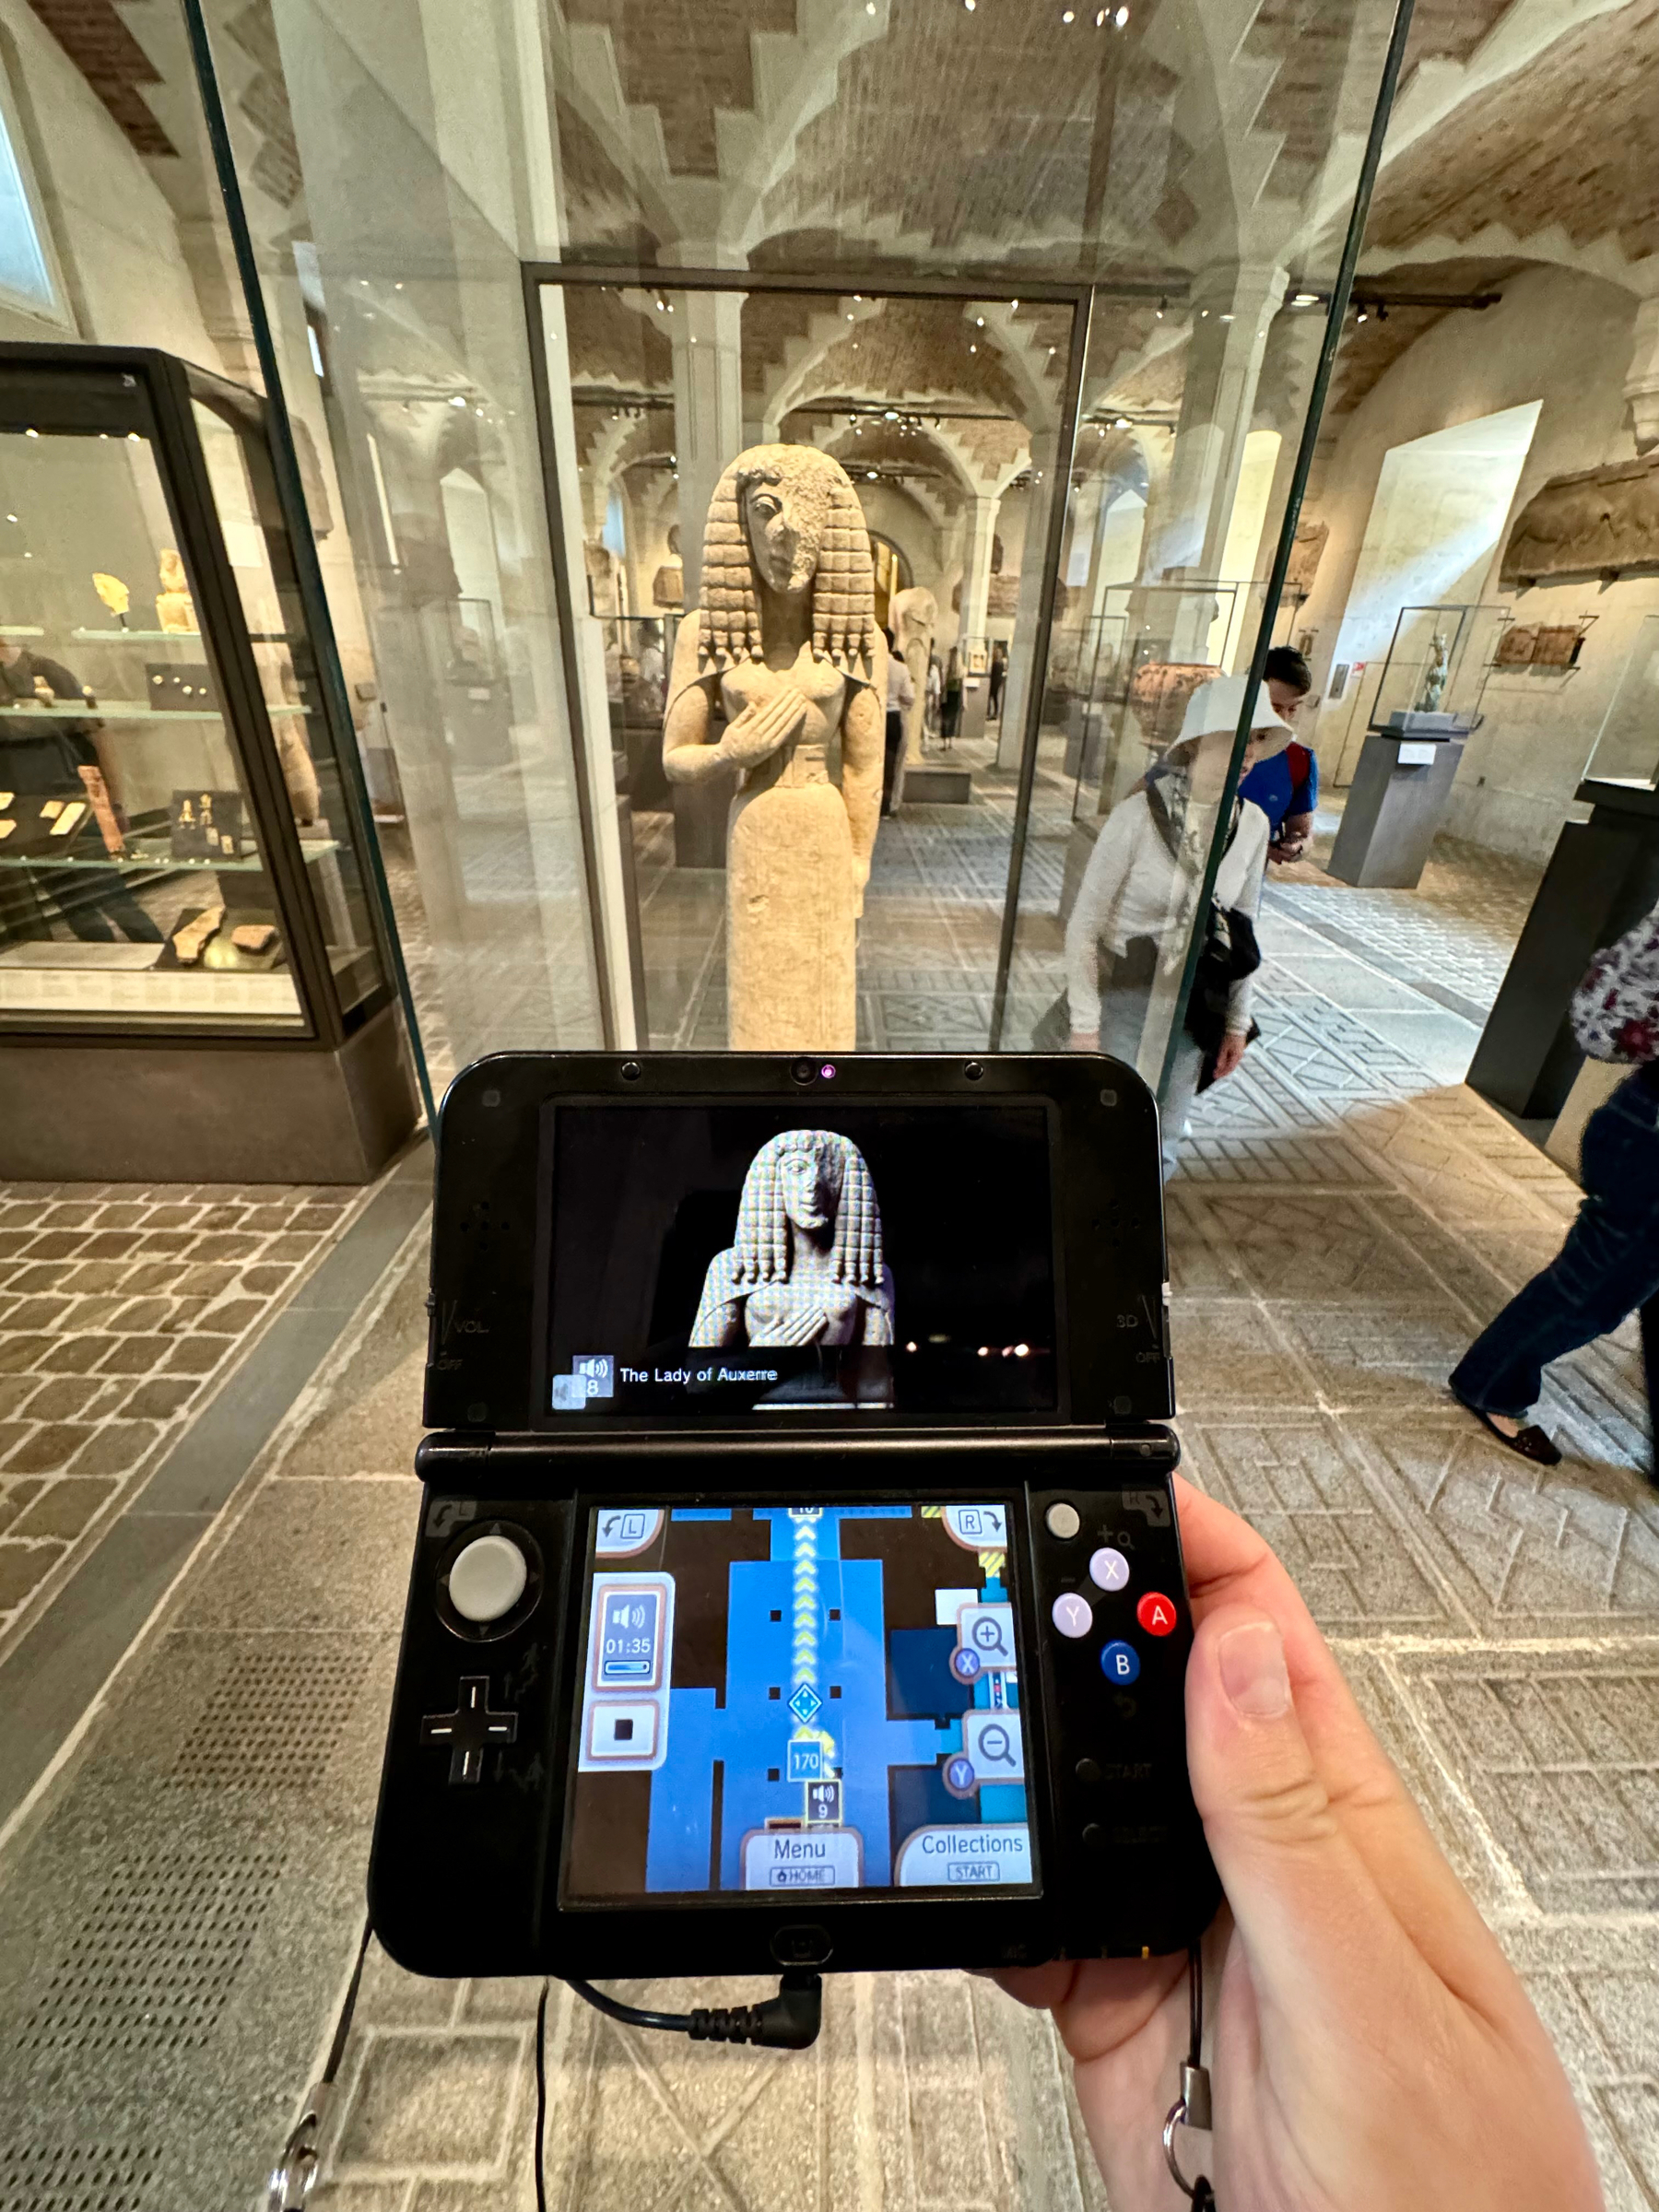 A handheld Nintendo 3DS gaming system is displaying a digital image of an ancient statue titled “The Lady of Auxerre,” perfectly lined up with the actual statue visible in a glass display case in the background of a museum. 